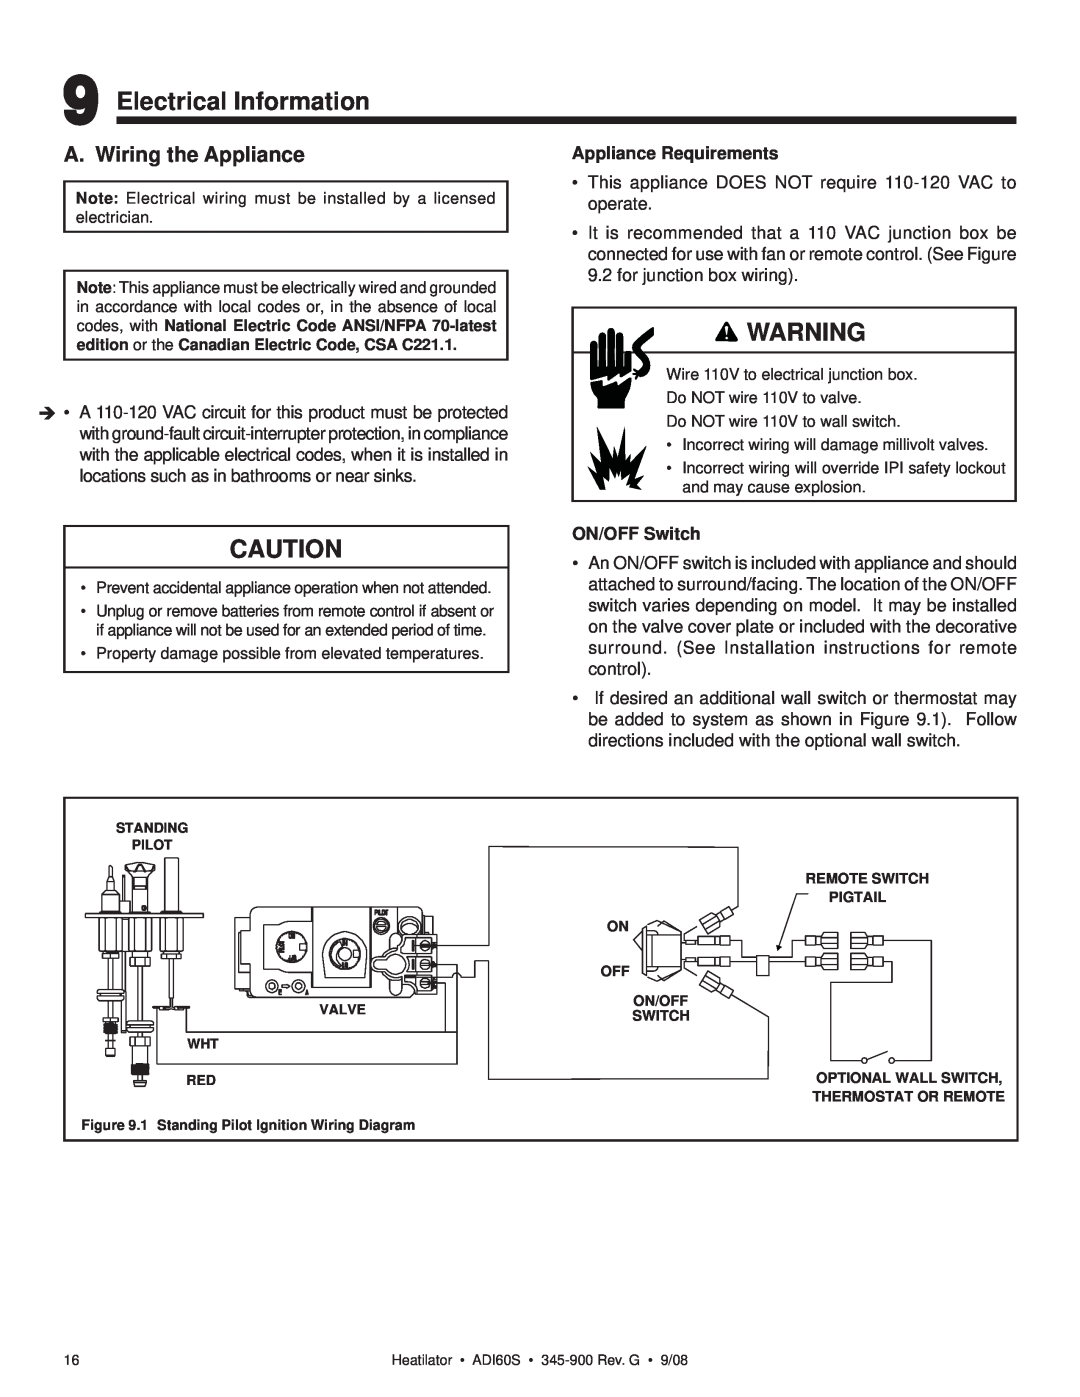 Heatiator ADI60S owner manual Electrical Information, A. Wiring the Appliance 